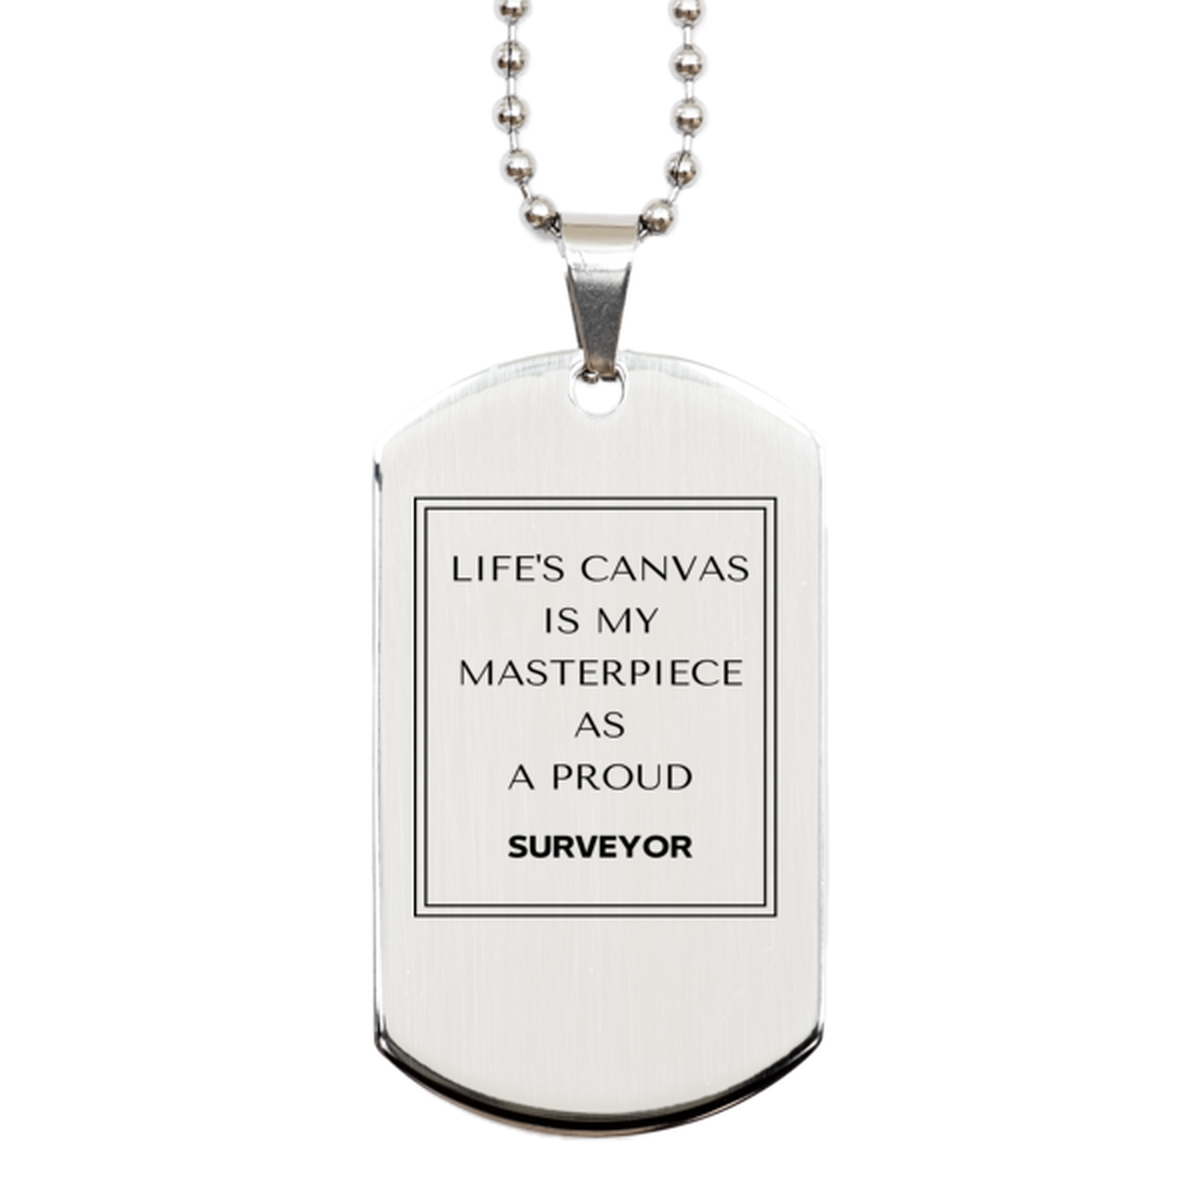 Proud Surveyor Gifts, Life's canvas is my masterpiece, Epic Birthday Christmas Unique Silver Dog Tag For Surveyor, Coworkers, Men, Women, Friends